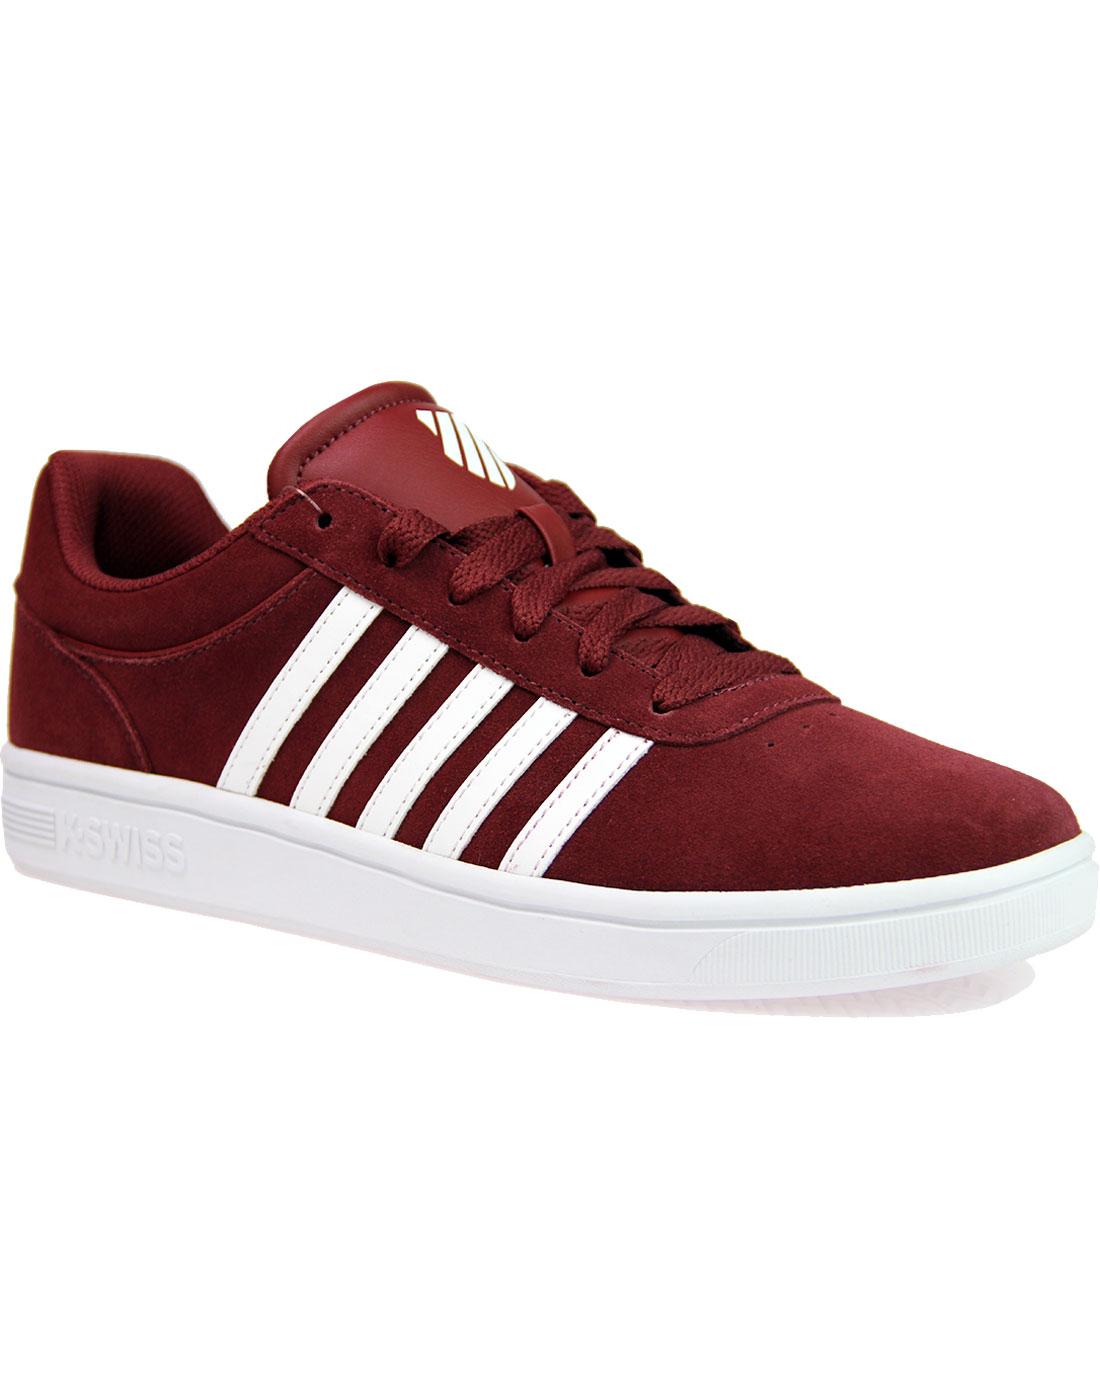 K-SWISS 'Court Cheswick' Suede Tennis Trainers in Oxblood